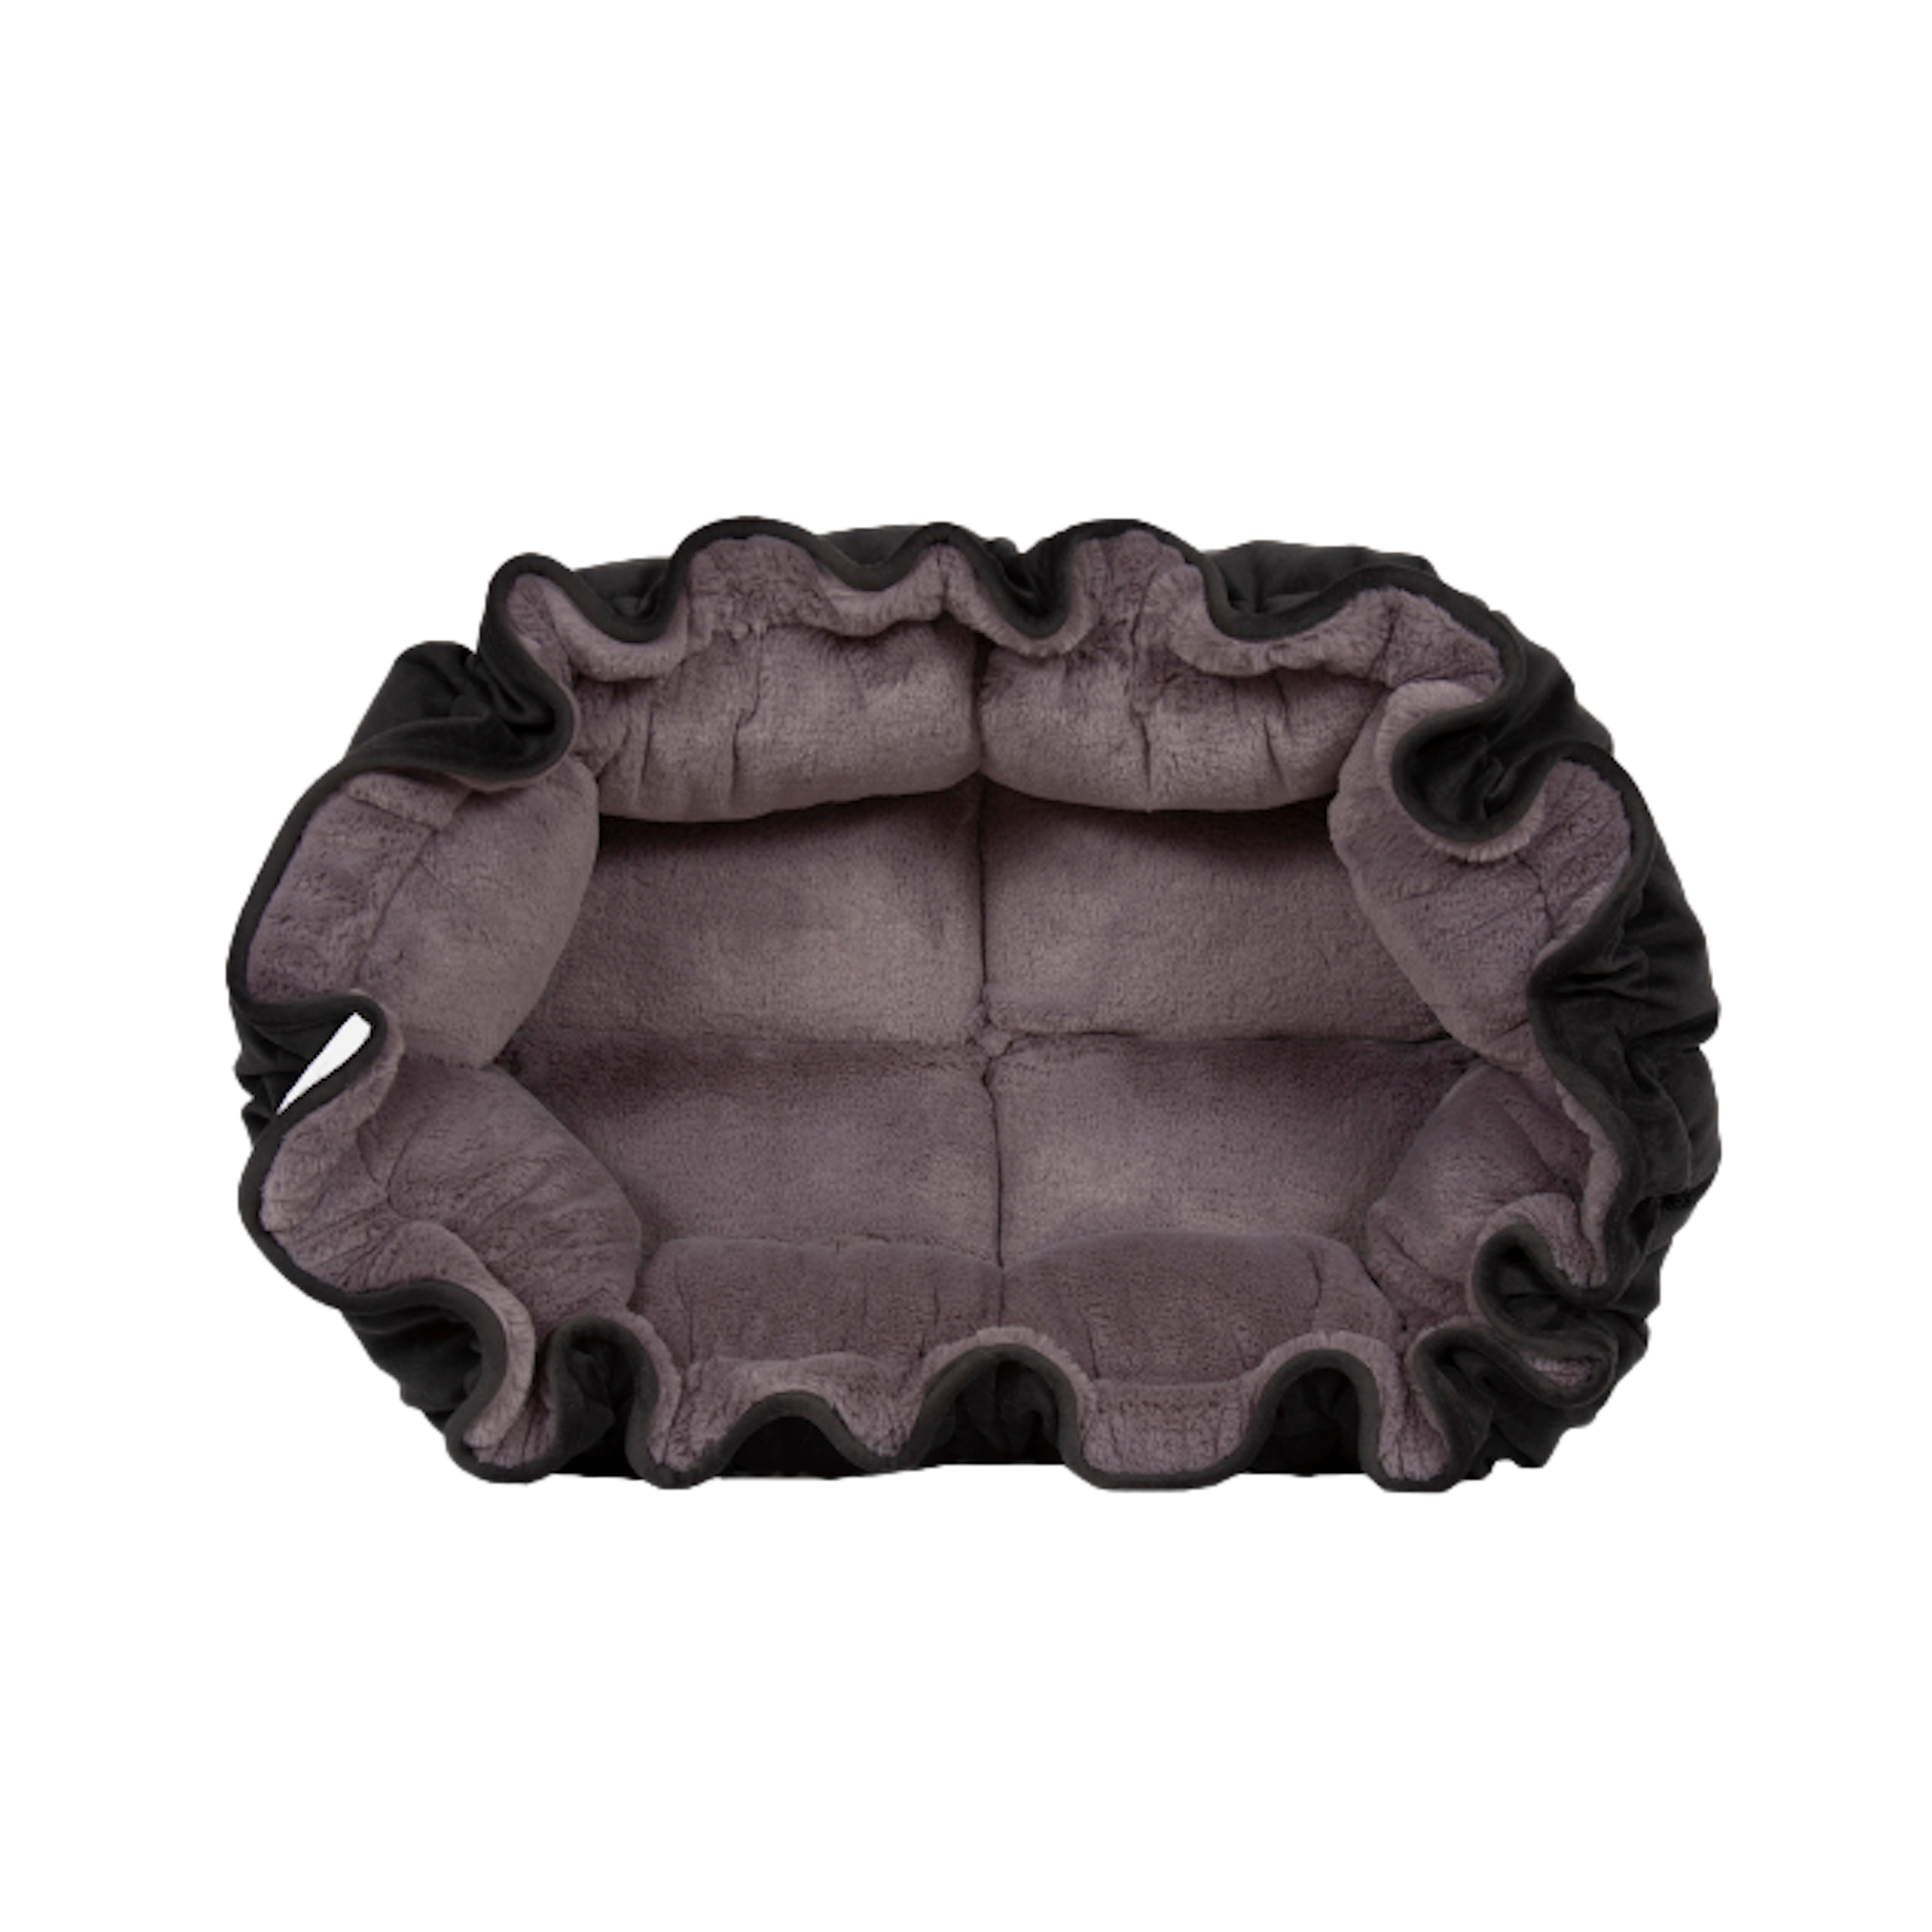 LILY-PAD-CUDDLE-BURROW-CHARCOAL-GRAY-DOG-BED